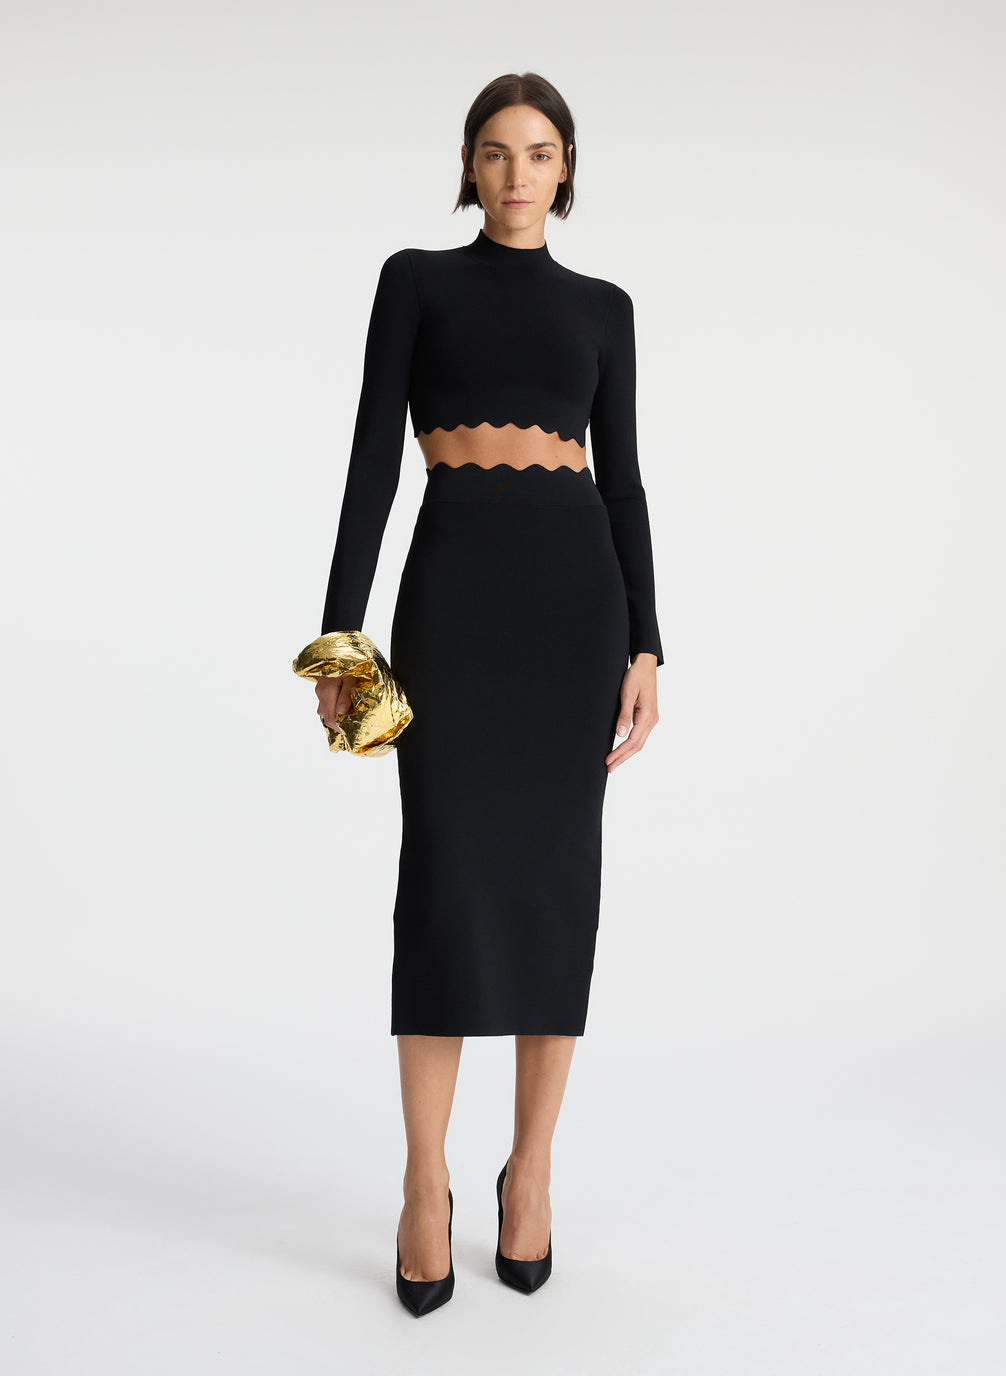 front view of woman wearing black long sleeve crop top  with scallop detailing and matching black scalloped detailing knit midi skirt